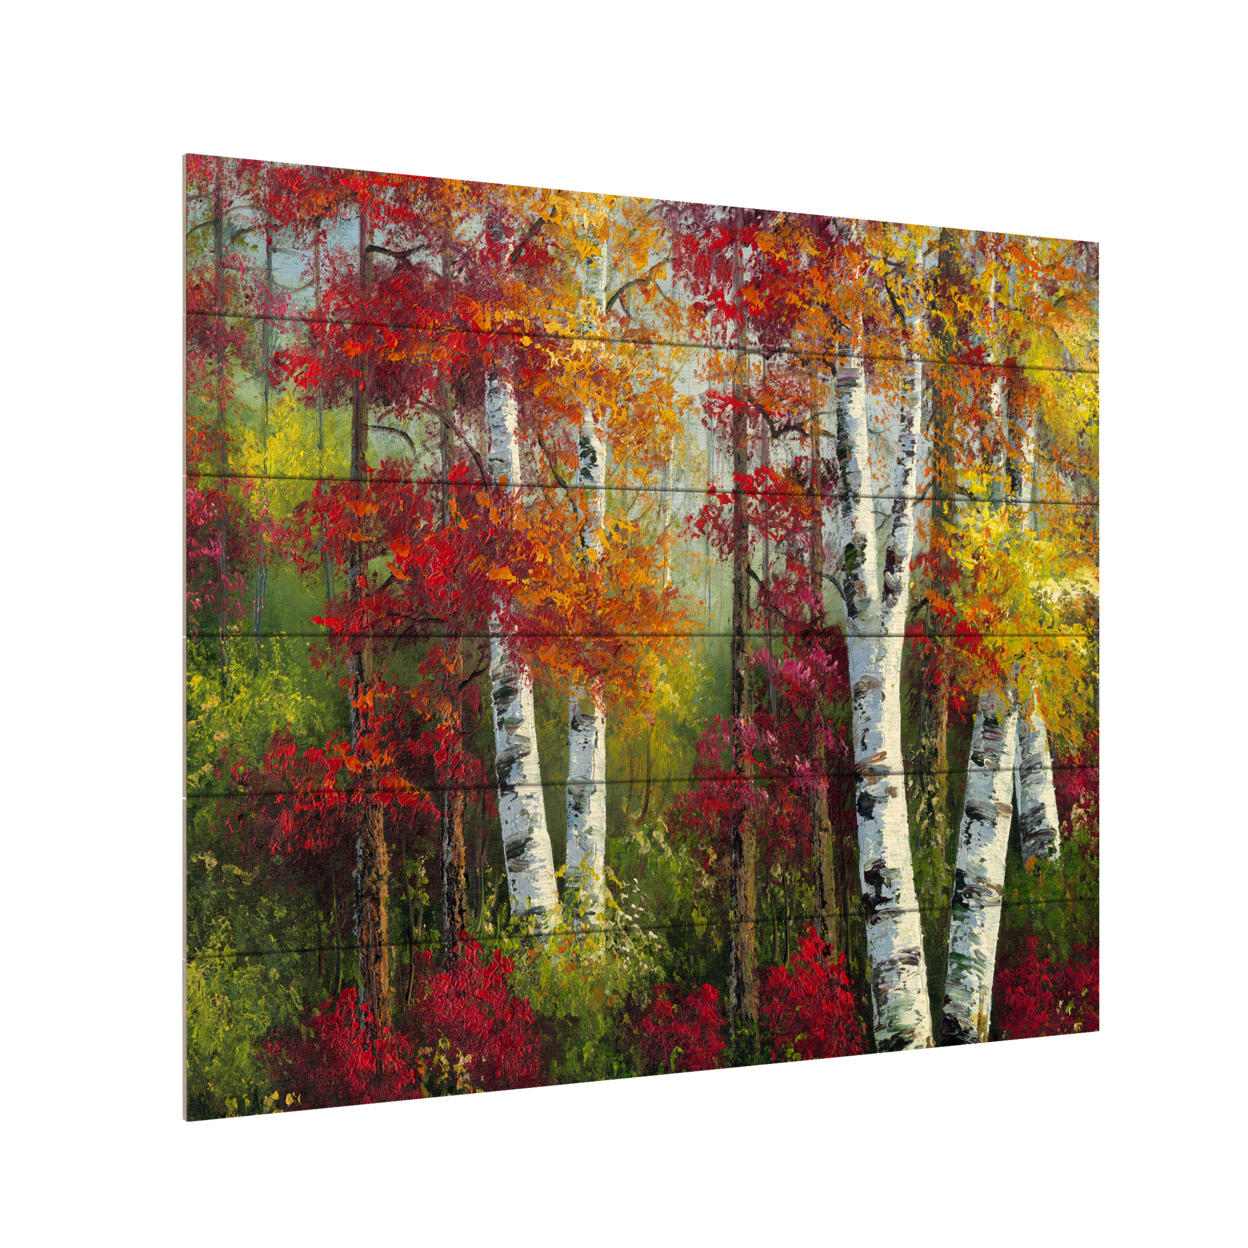 Wooden Slat Art 18 X 22 Inches Titled Indian Summer Ready To Hang Home Decor Picture